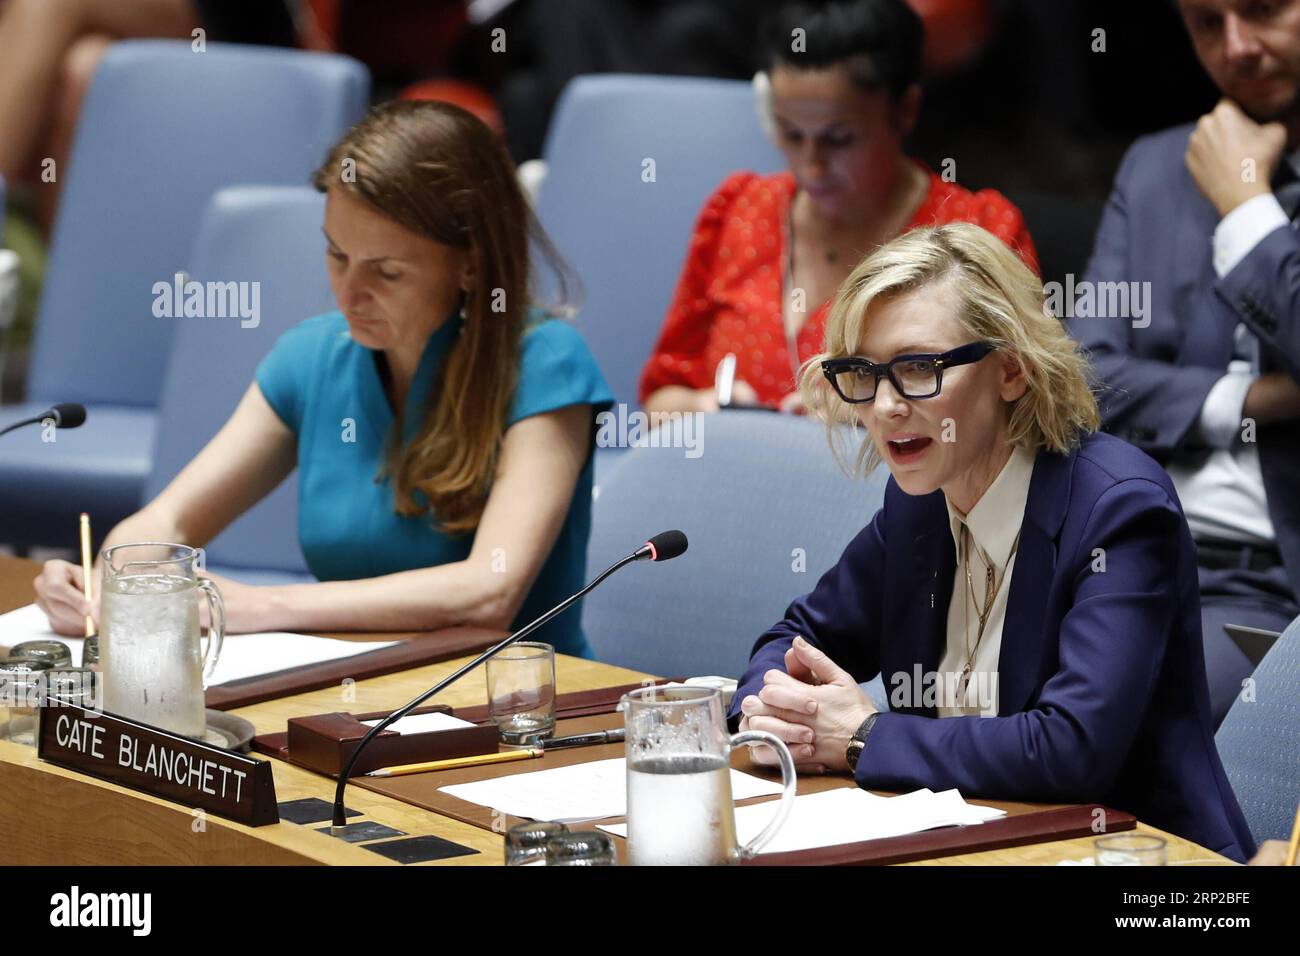 (180828) -- UNITED NATIONS, Aug. 28, 2018 -- Cate Blanchett (R, front), United Nations Refugee Agency Goodwill Ambassador, addresses the Security Council on the situation in Myanmar and the Rohingya refugee crisis, at the UN headquarters in New York, Aug. 28, 2018. Cate Blanchett on Tuesday asked for efforts to help Rohingya refugees in Bangladesh and to create the right conditions for their return to Myanmar. ) UN-SECURITY COUNCIL-MYANMAR-ROHINGYA CRISIS-CATE BLANCHETT LixMuzi PUBLICATIONxNOTxINxCHN Stock Photo